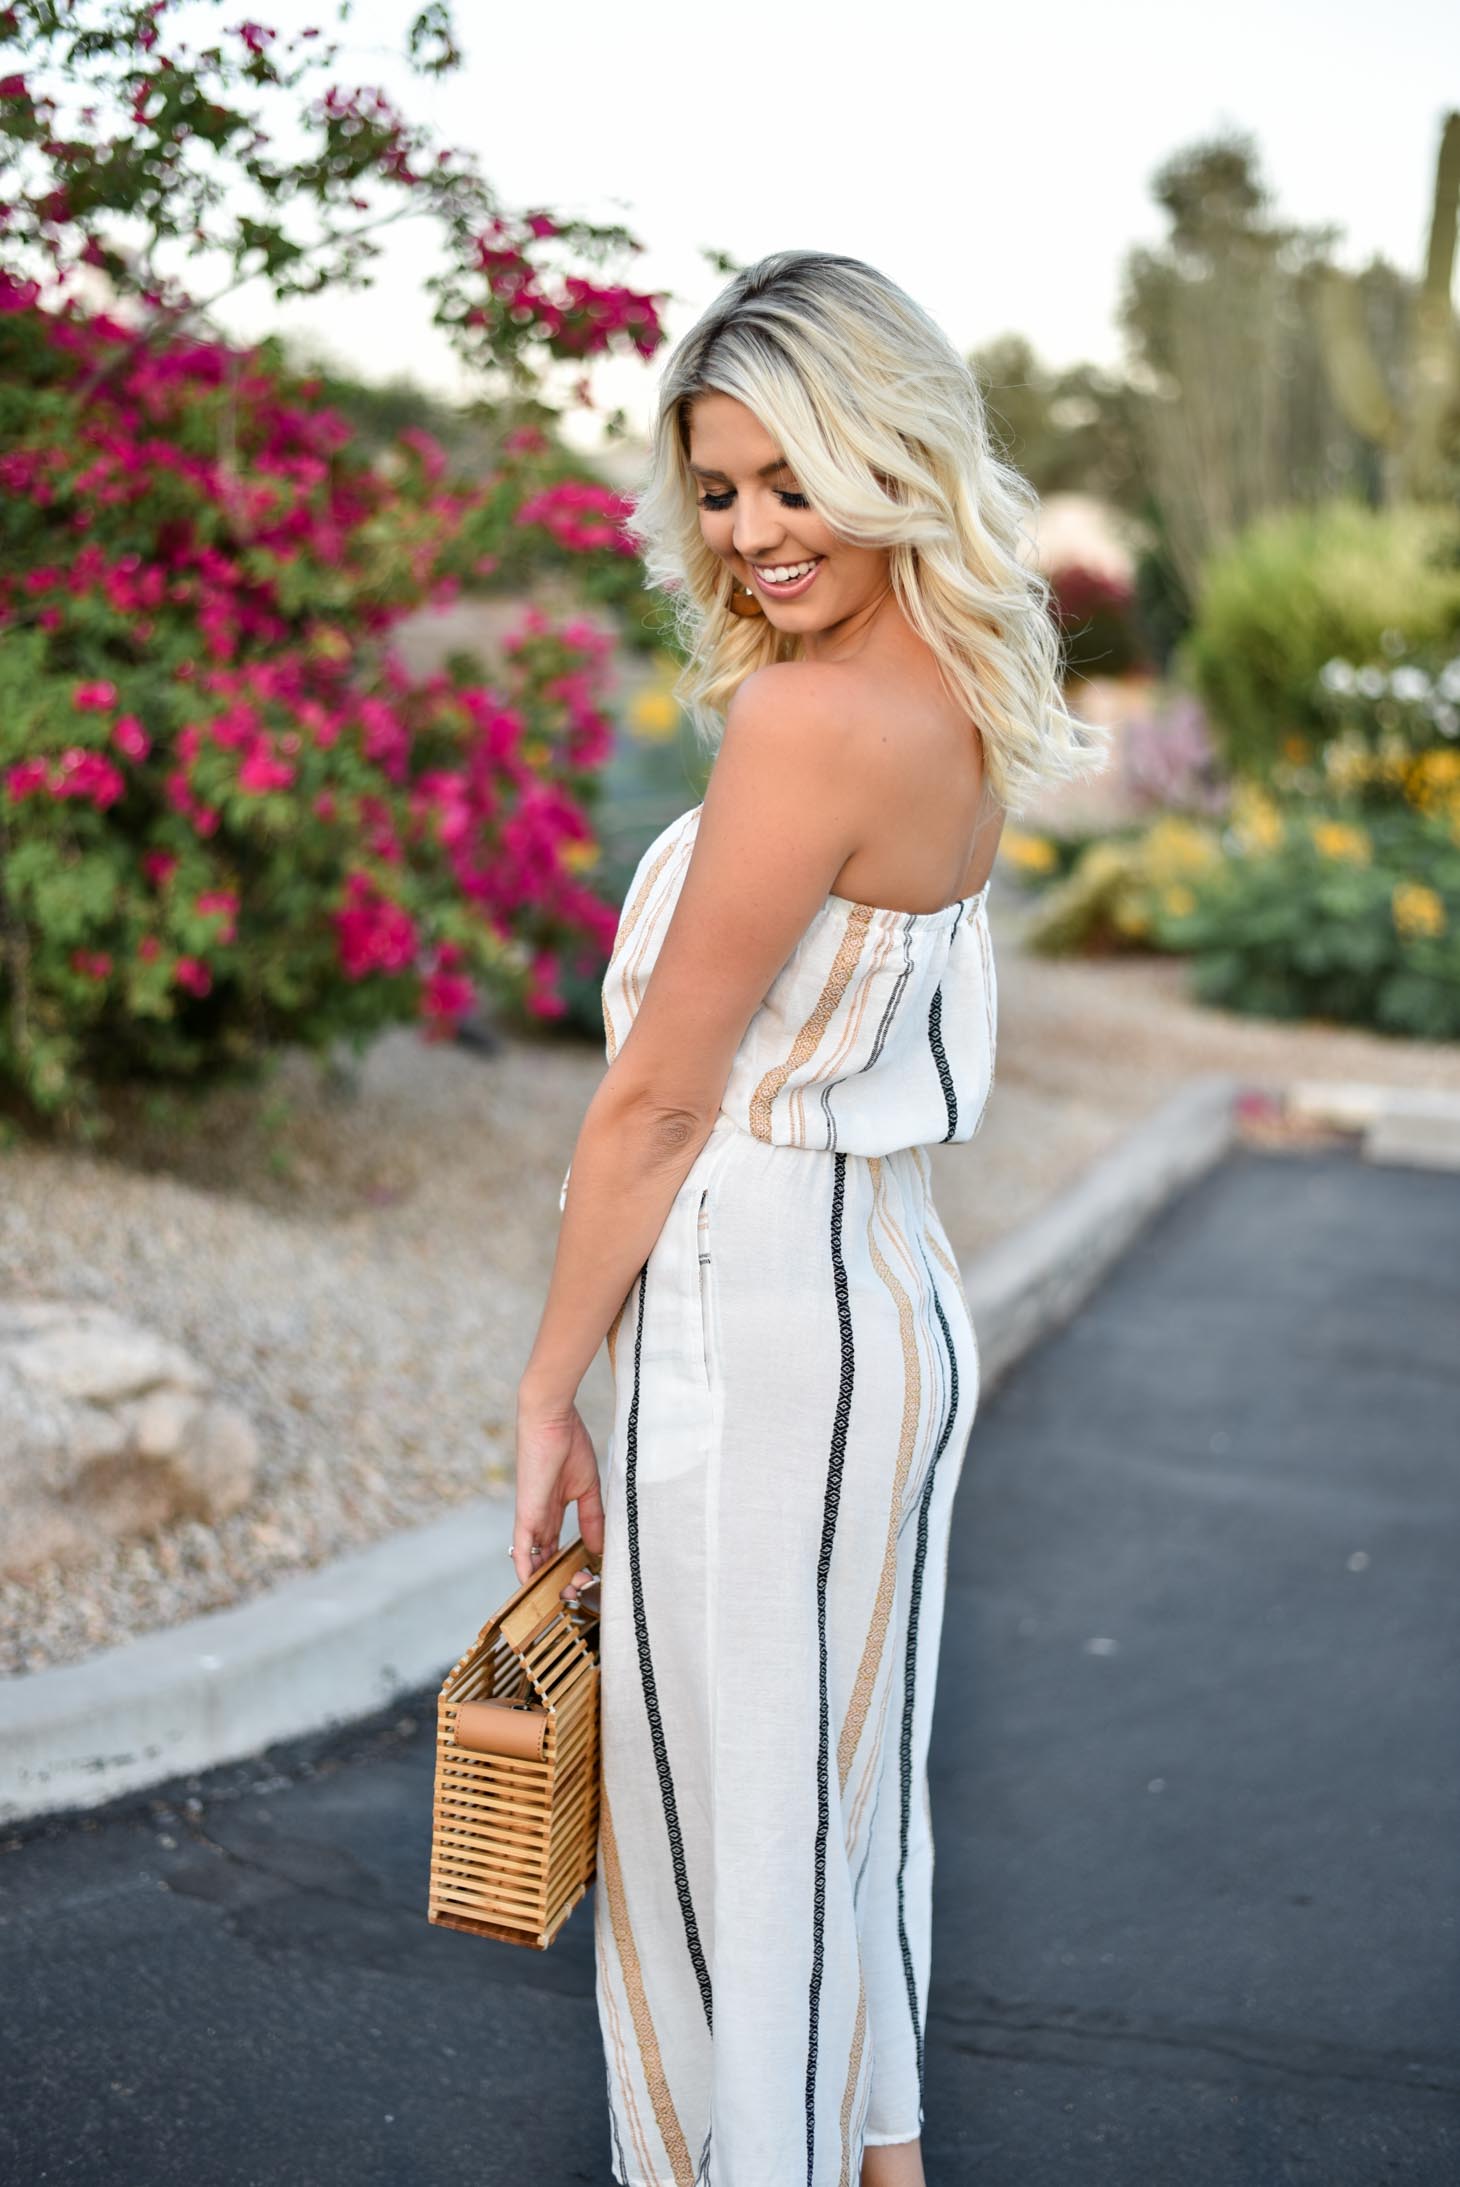 Erin Elizabeth of Wink and a Twirl shares this Vici Dolls striped jumpsuit and bamboo bag perfect for summer